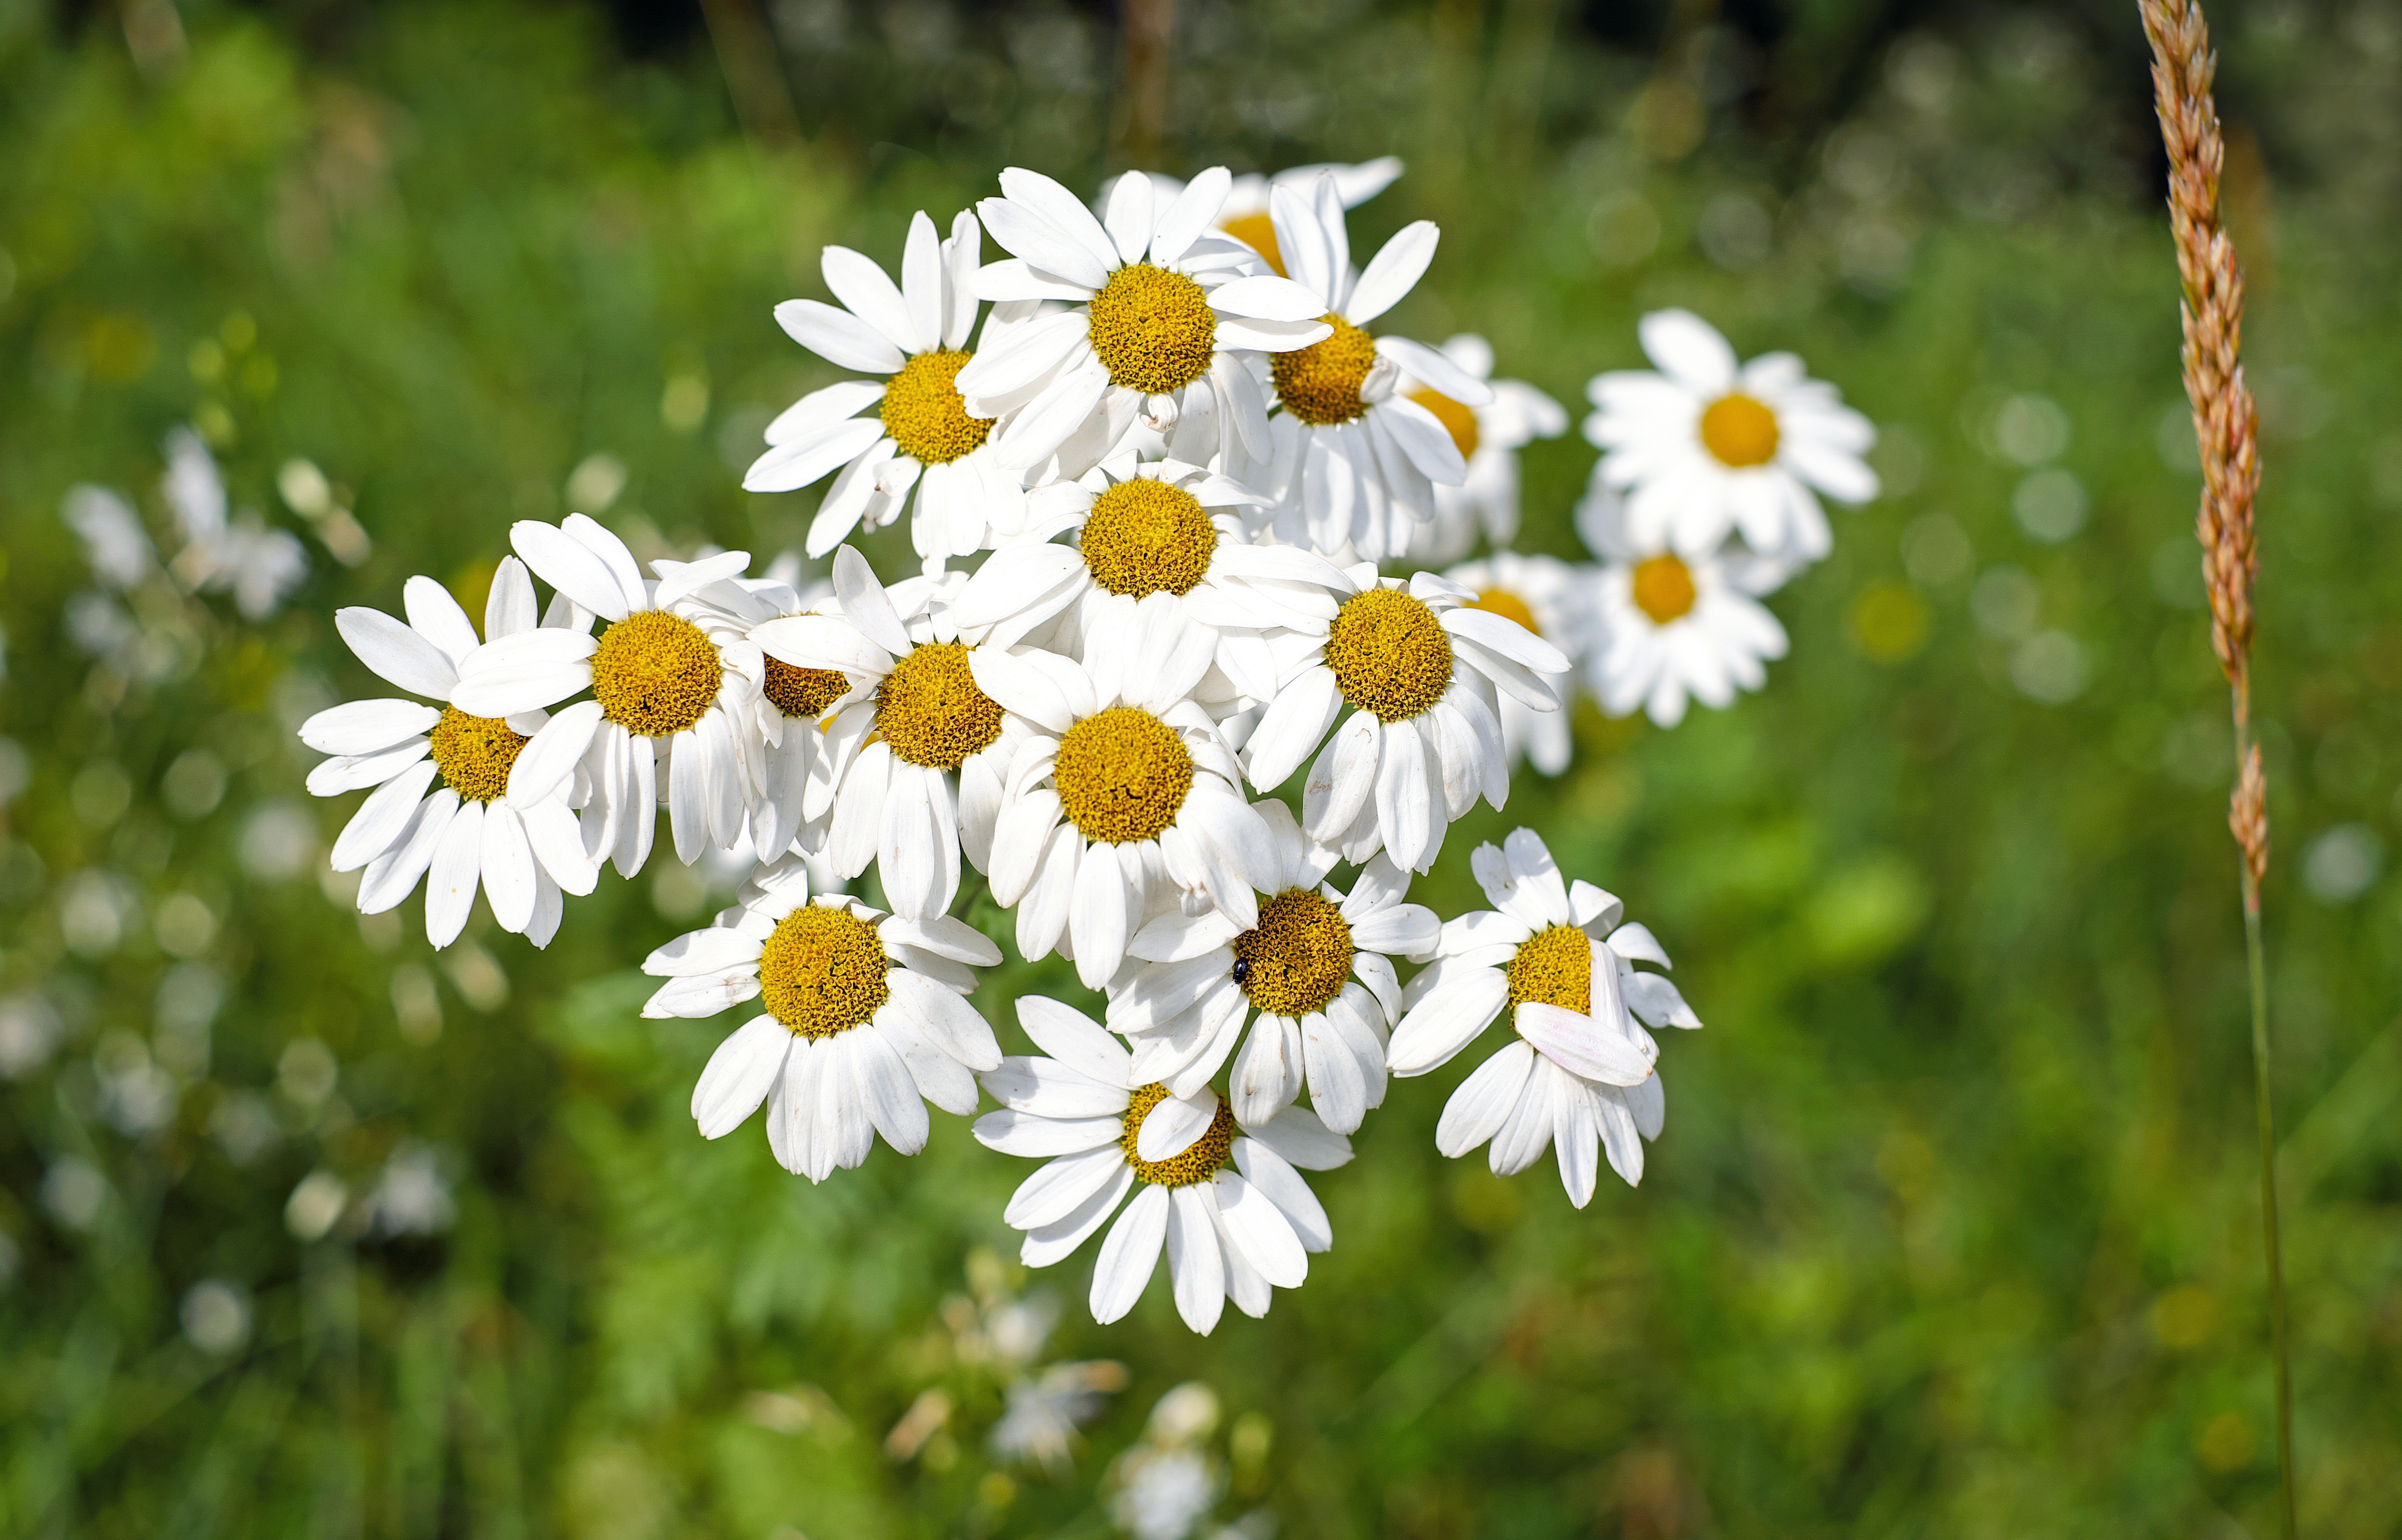 earth, daisy, chamomile, close up, flower, nature, summer, wildflower, flowers